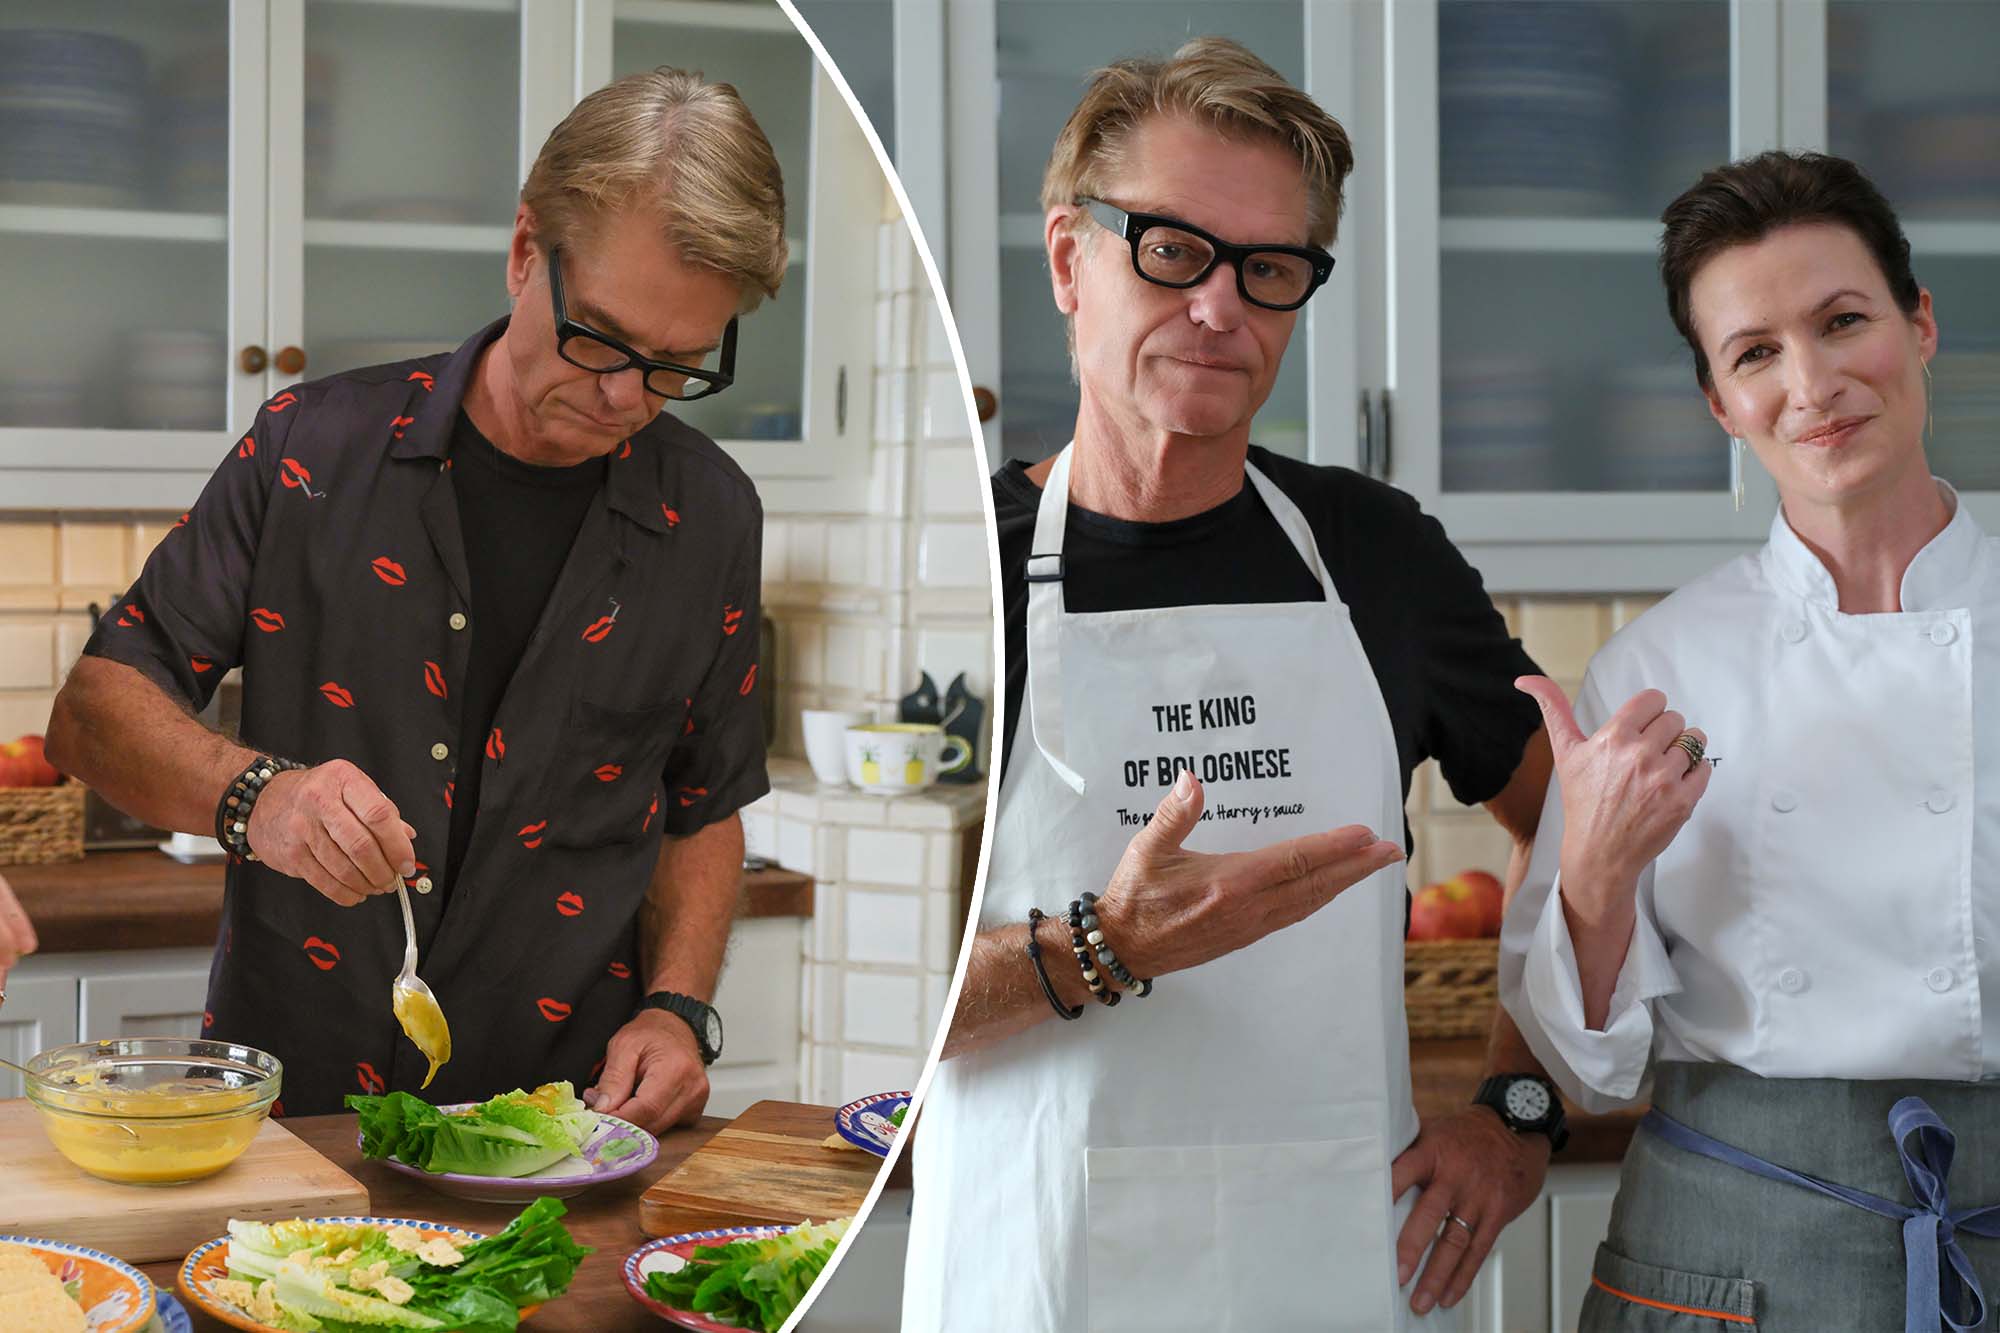 Harry Hamlin on his cooking show, Lisa Rinna marriage — and that arrest: ‘I recommend 18 days in jail for everybody’